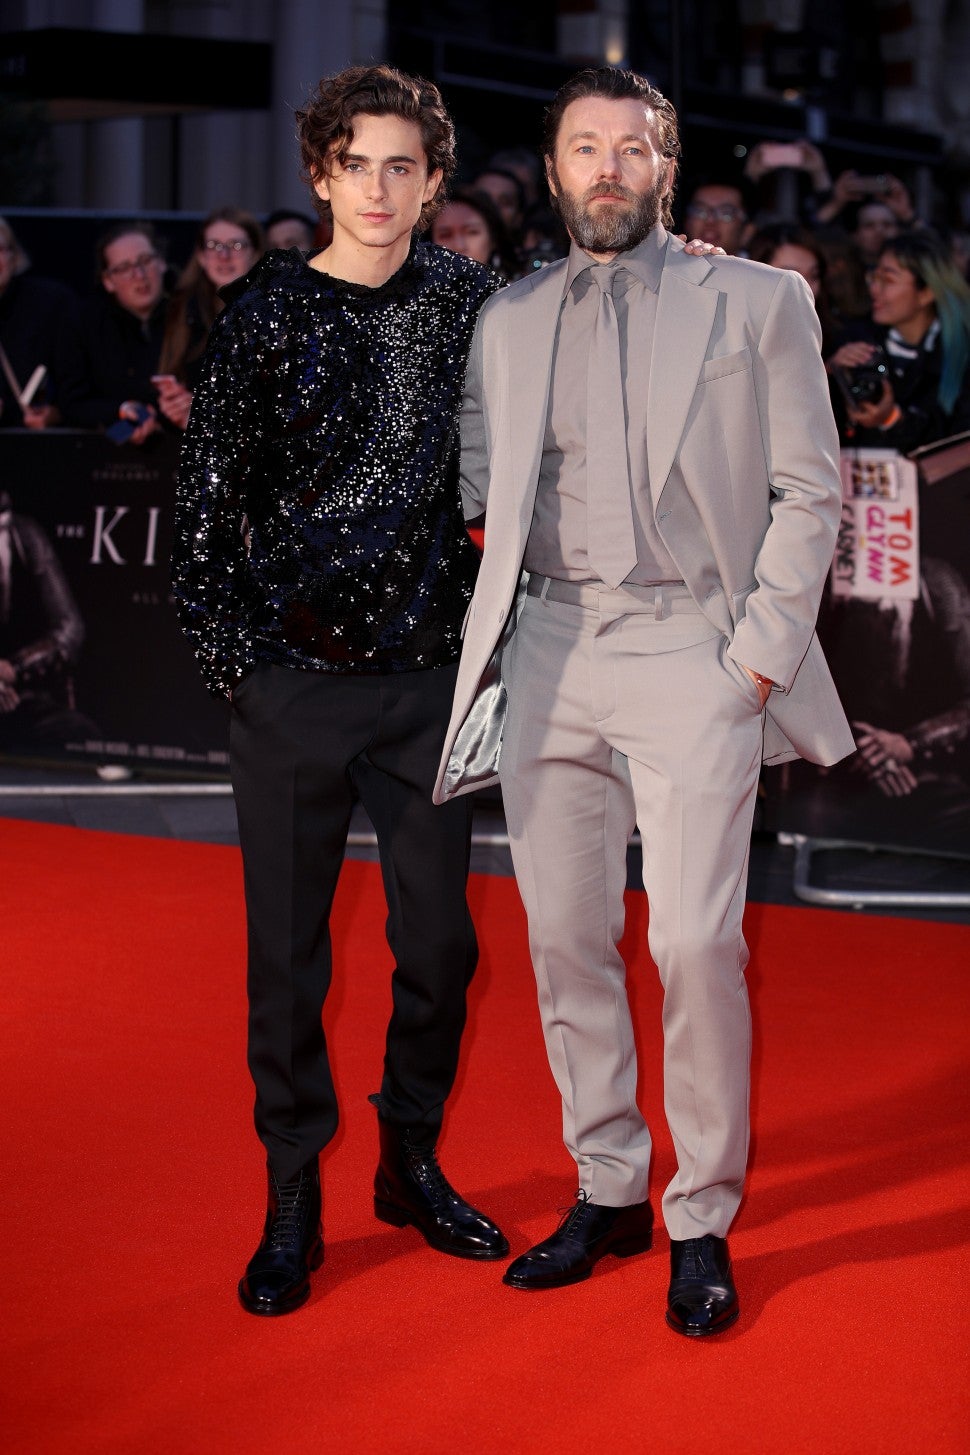 Timothee Chalamet and Joel Edgerton at The King premiere in London